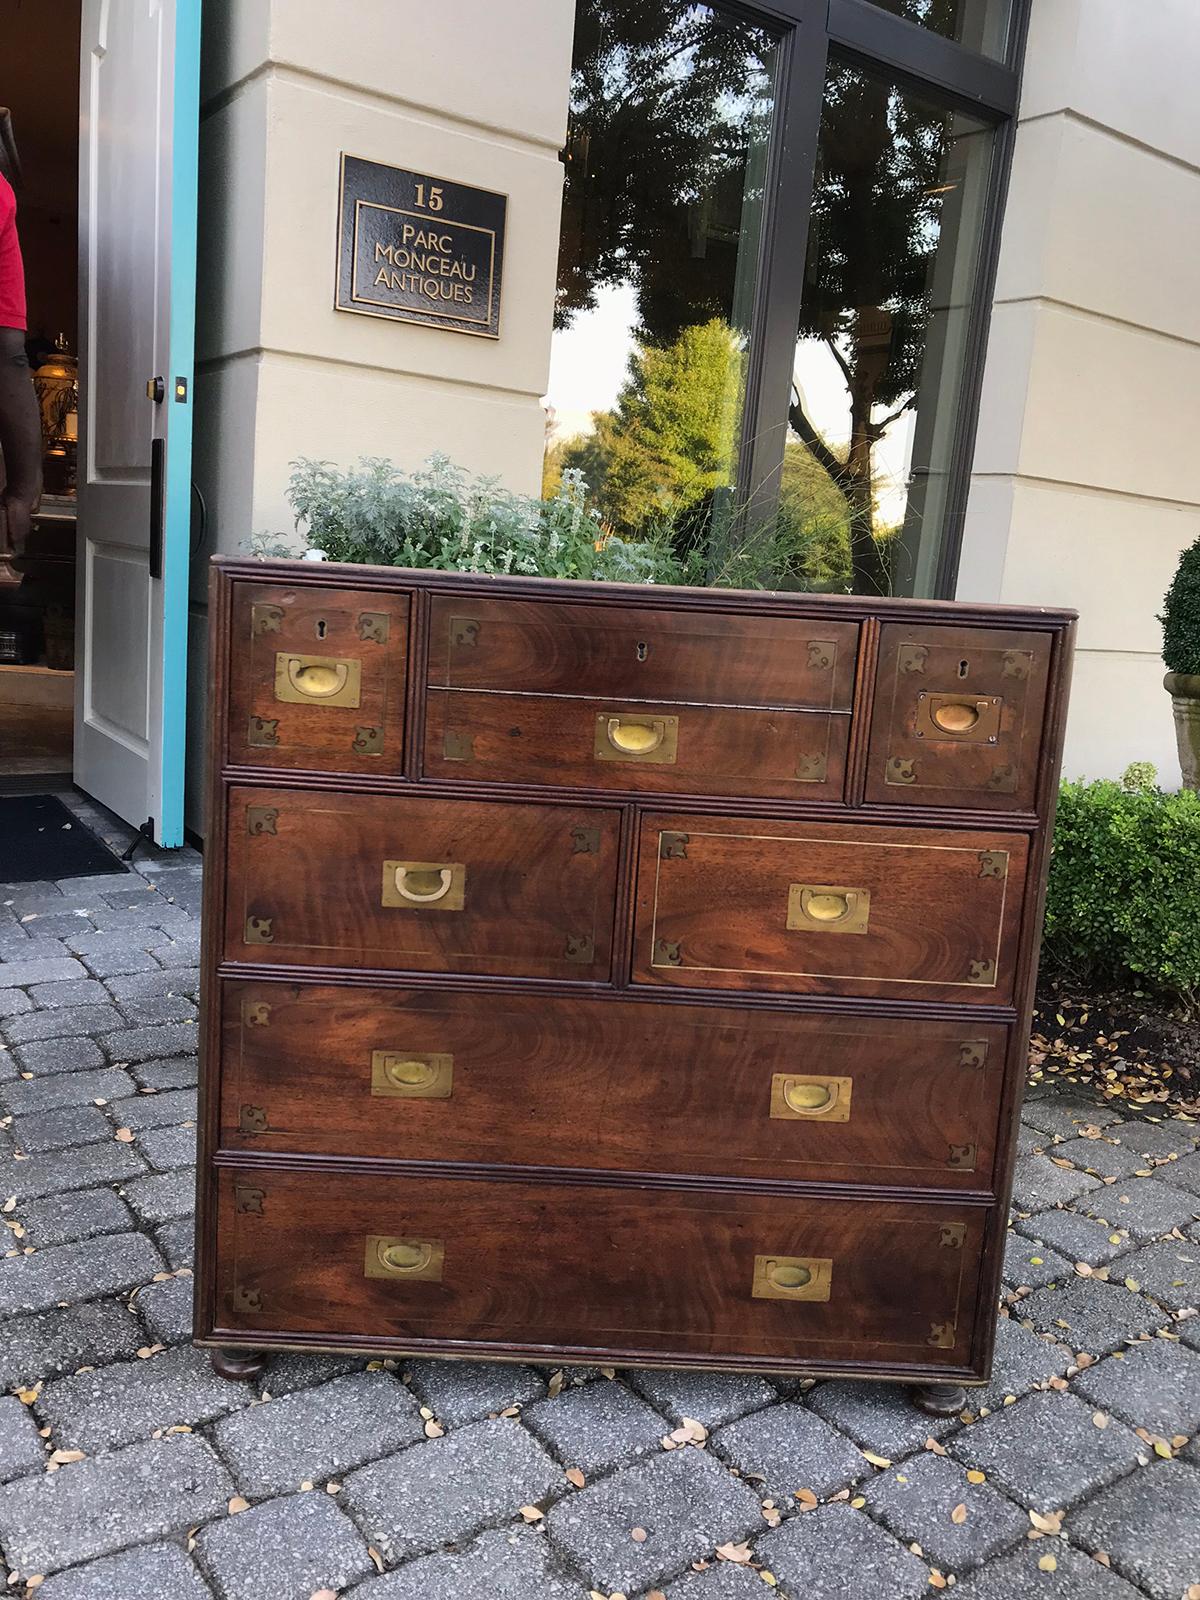 20th century mahogany Campaign style secretary chest with brass inlay and mounts
Labeled 